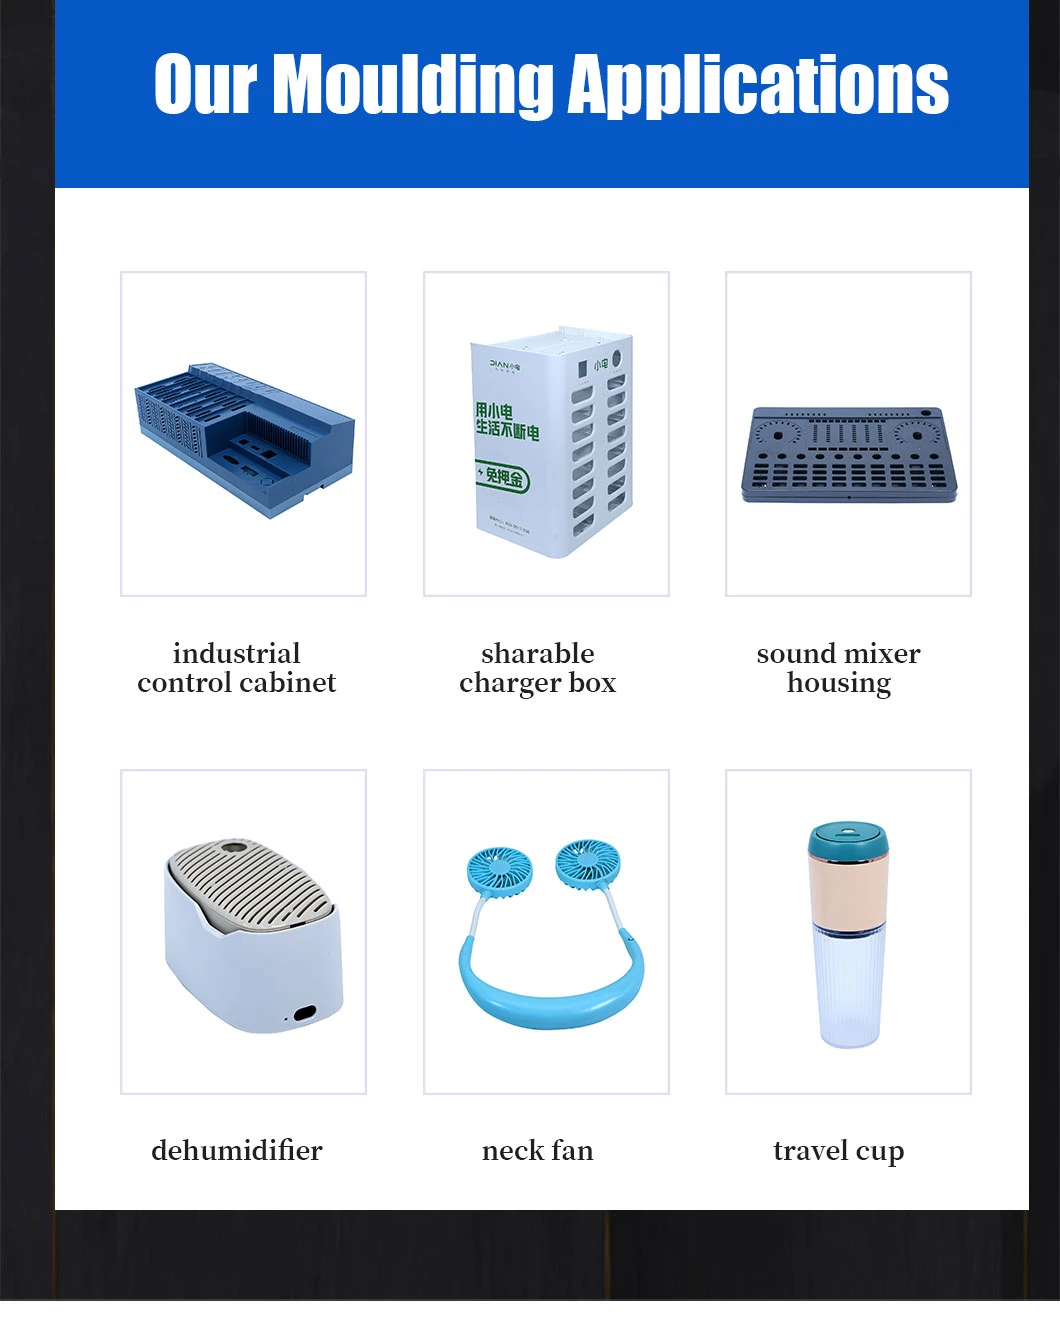 Quality Injection Molding for Home Use Device Automobile Motorcycle Printer Medical Equipment Consumer Electronics Products, Free Technical Consulting Available